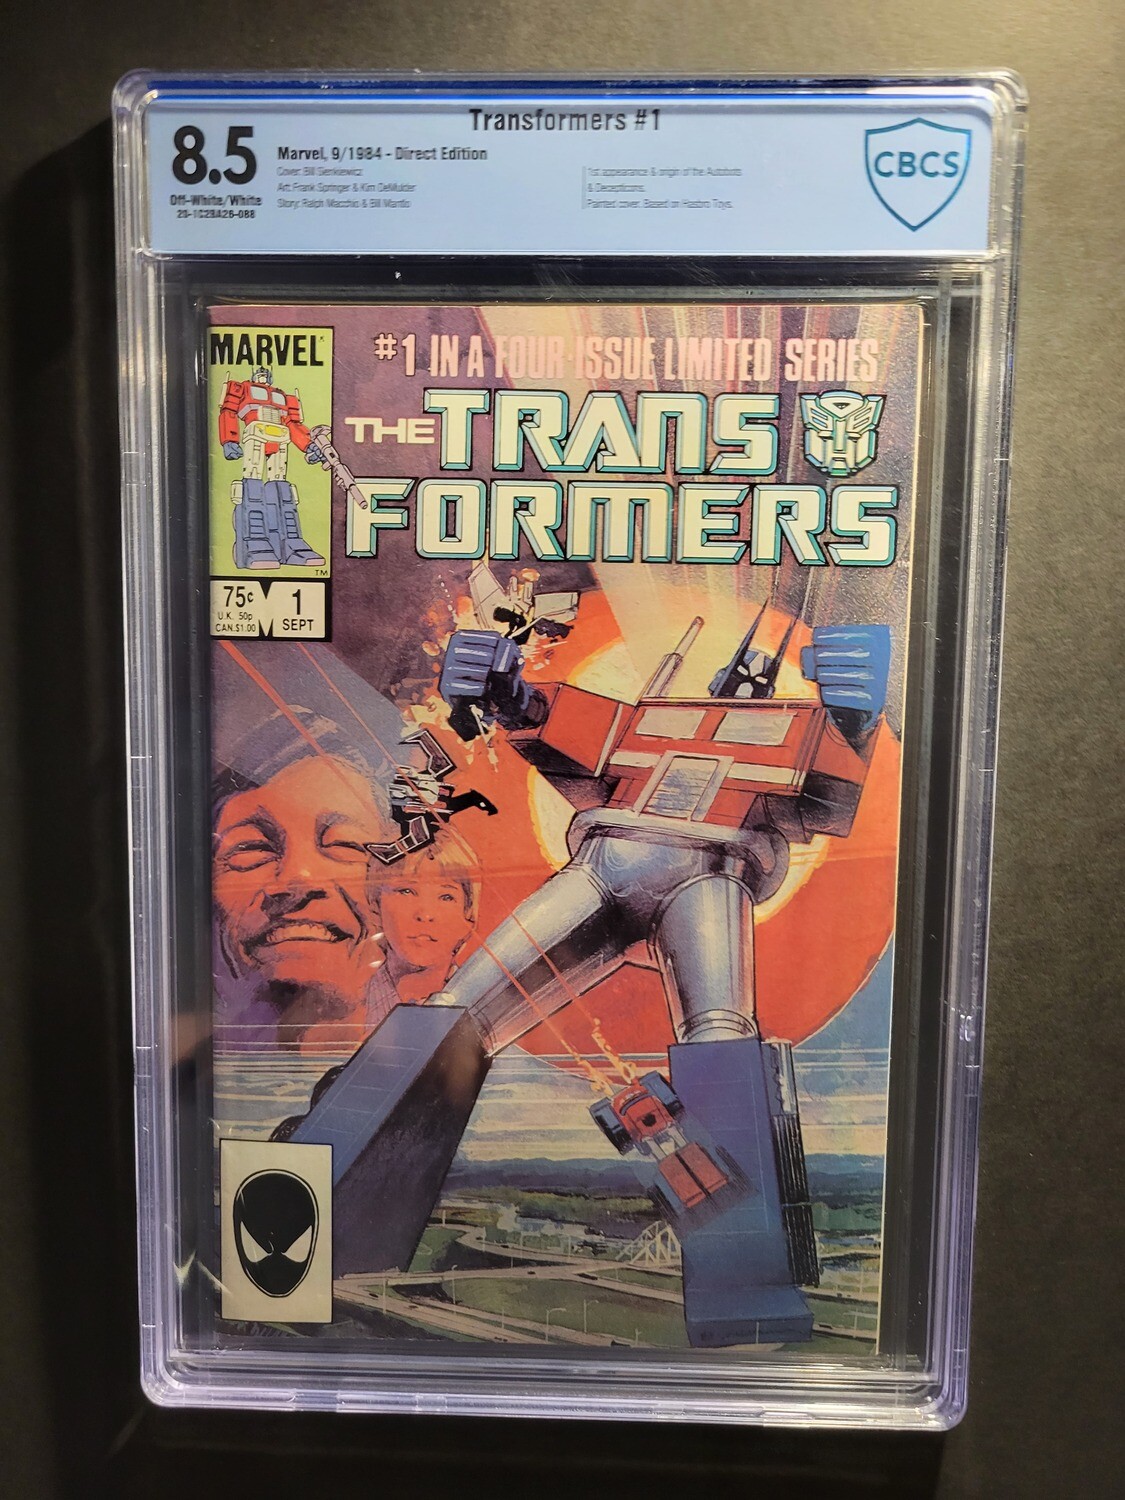 Transformers #1 CBCS 8.5 1st appearance of the Autobots and Decepticons